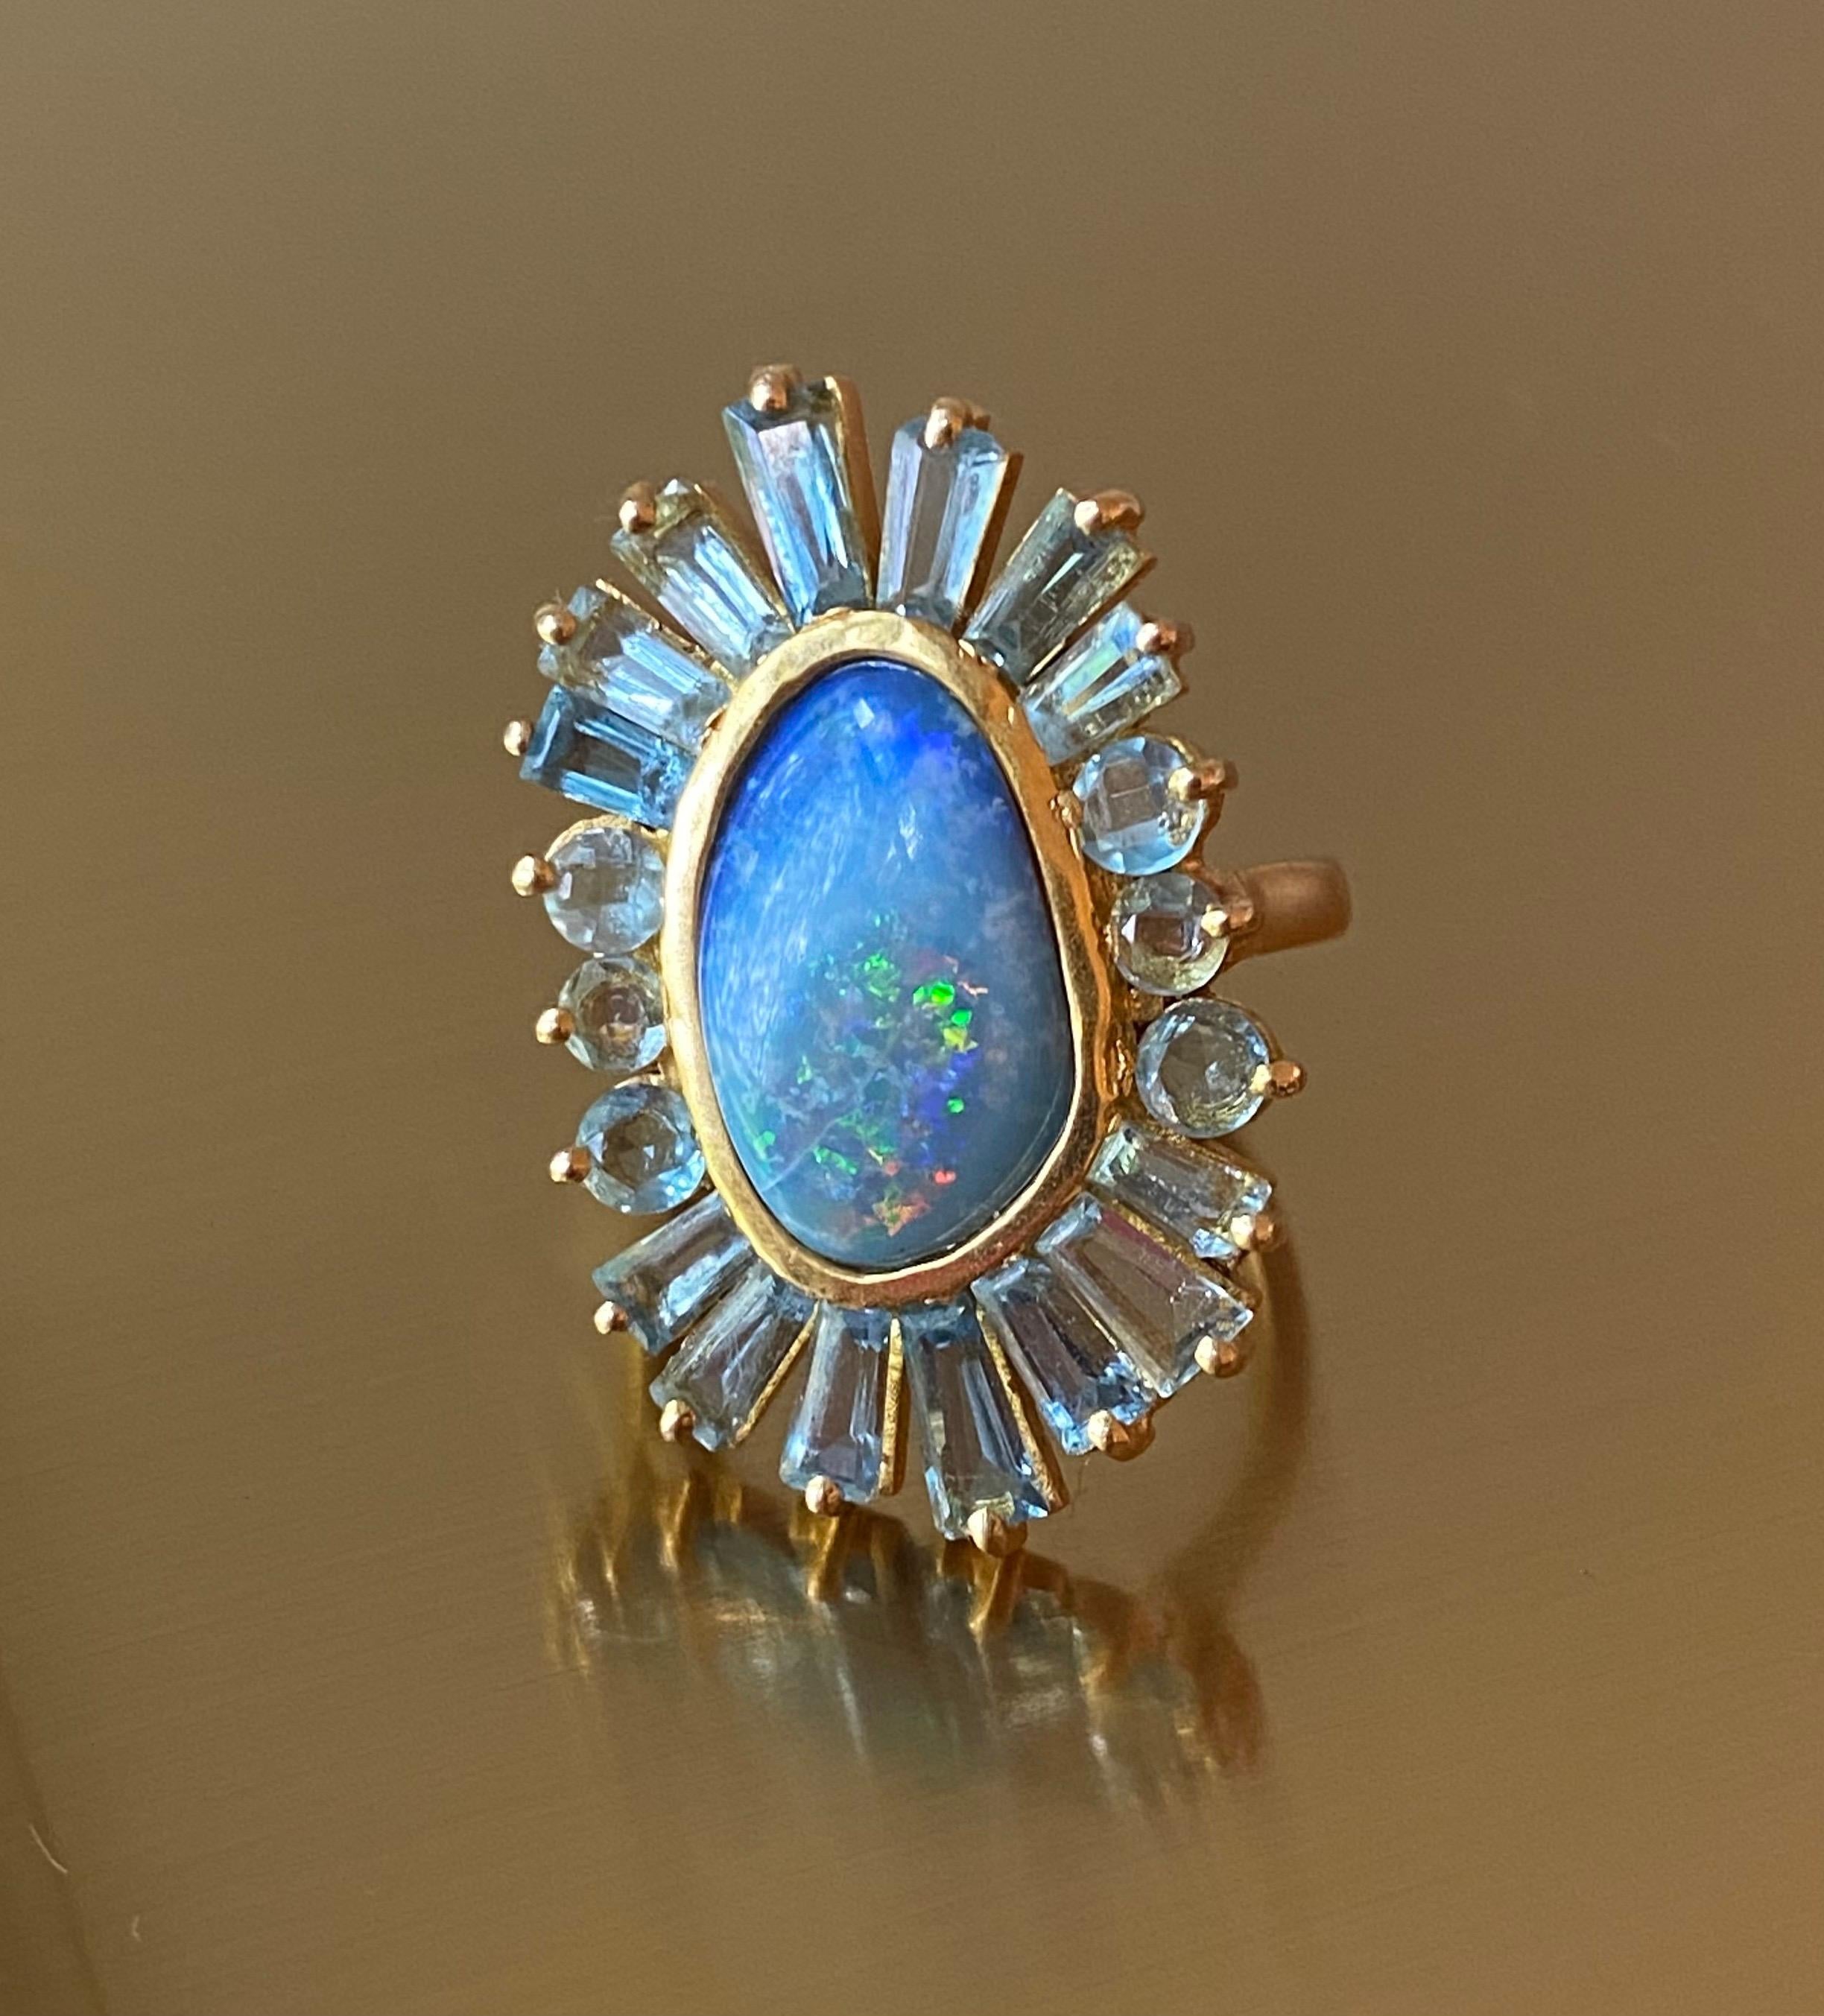 Designed by award winning jewelry designer, Lauren Harper, this Boulder Opal and Aquamarine Cocktail Ring is set in a warm 18kt Yellow Gold and is sure to dazzle. Size 6. Ships in beautiful Lauren Harper Collection Packaging worthy of gift giving.